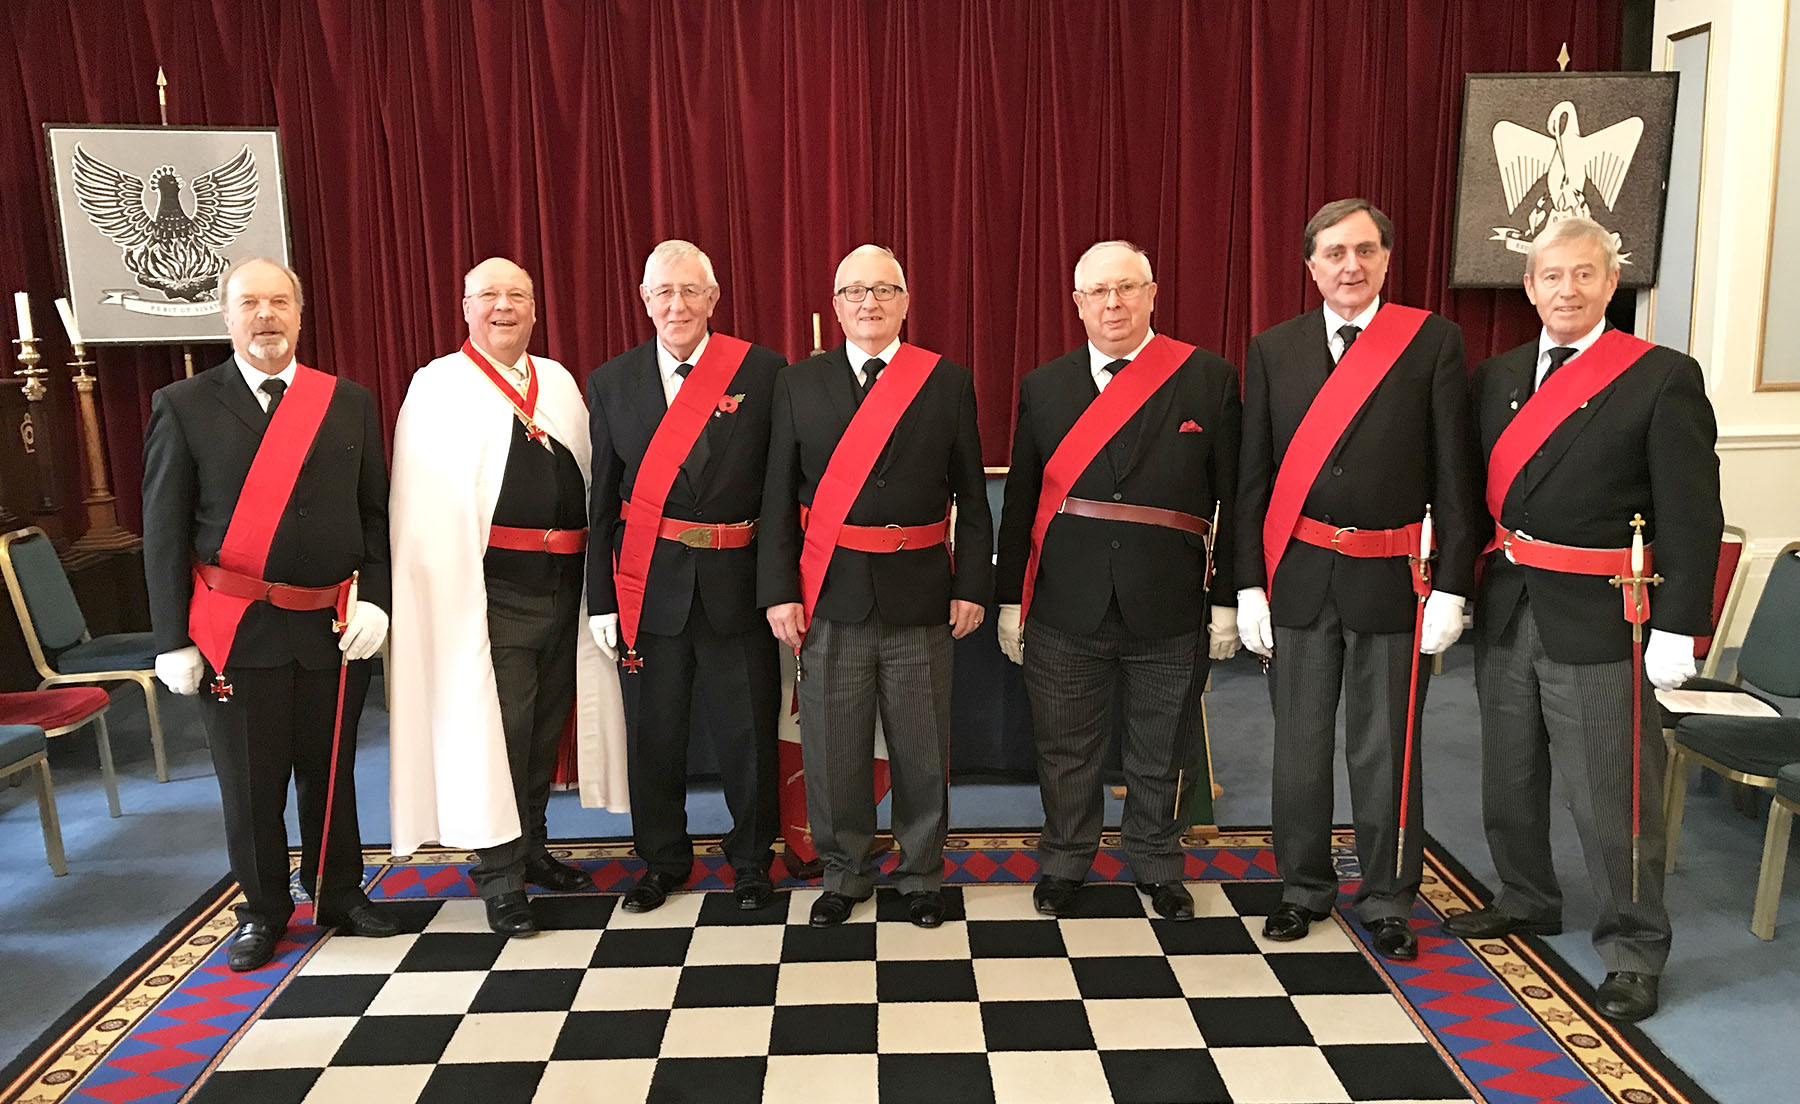 Our Provincial Almoner becomes a Squire Novice